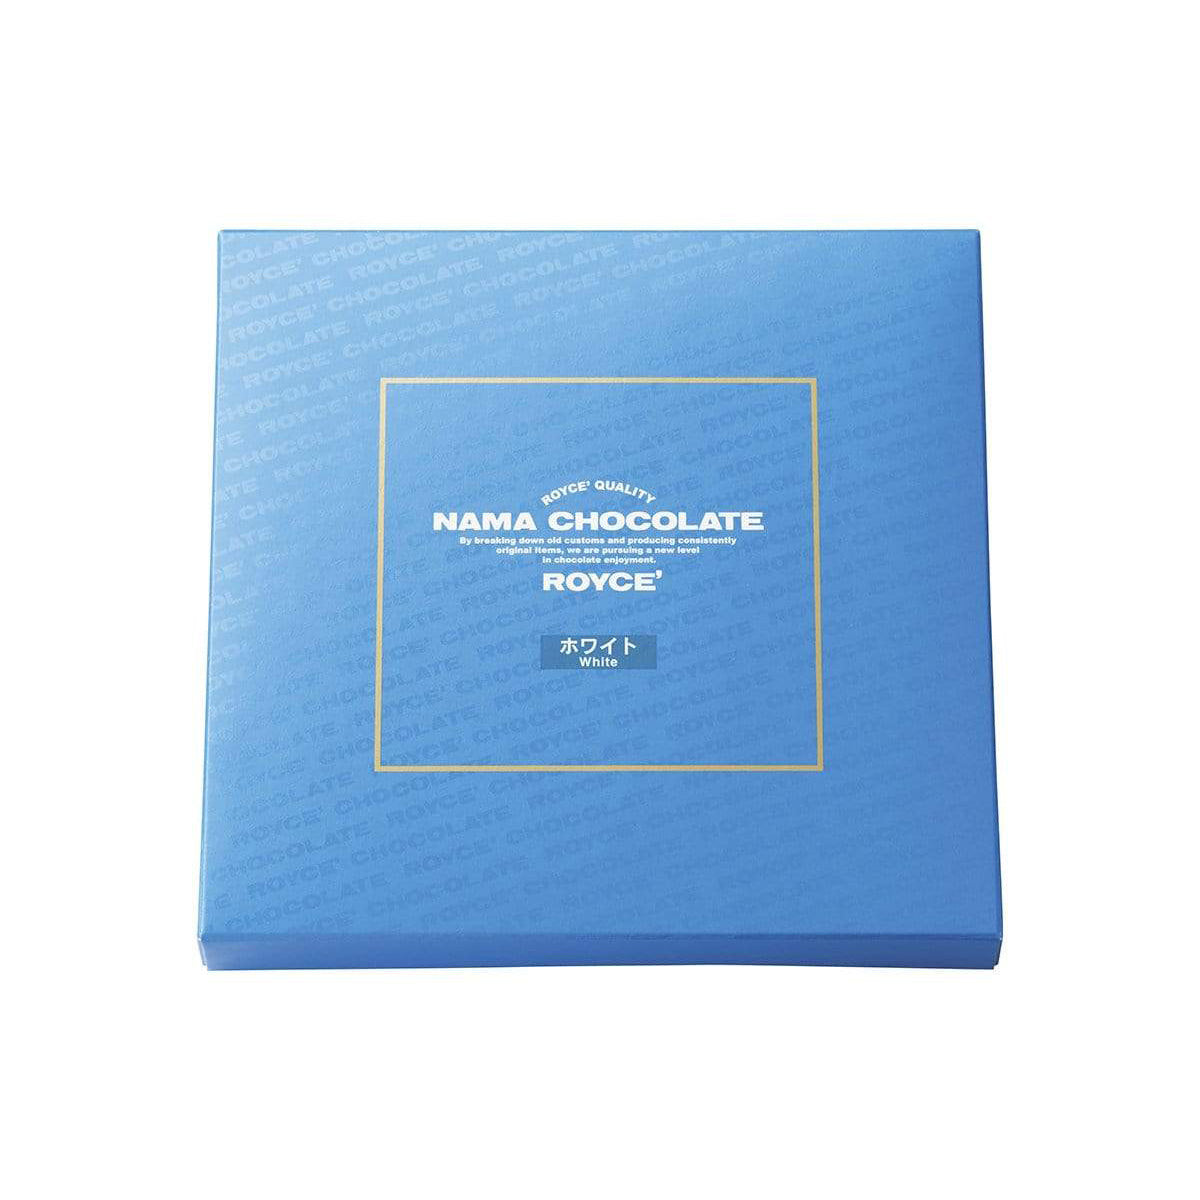 ROYCE' Chocolate - Nama Chocolate "White" - Image shows a blue box. White text inside golden square says ROYCE' Quality Nama Chocolate By breaking down old customs and producing consistently original items, we are pursuing a new level in chocolate enjoyment. ROYCE' White.